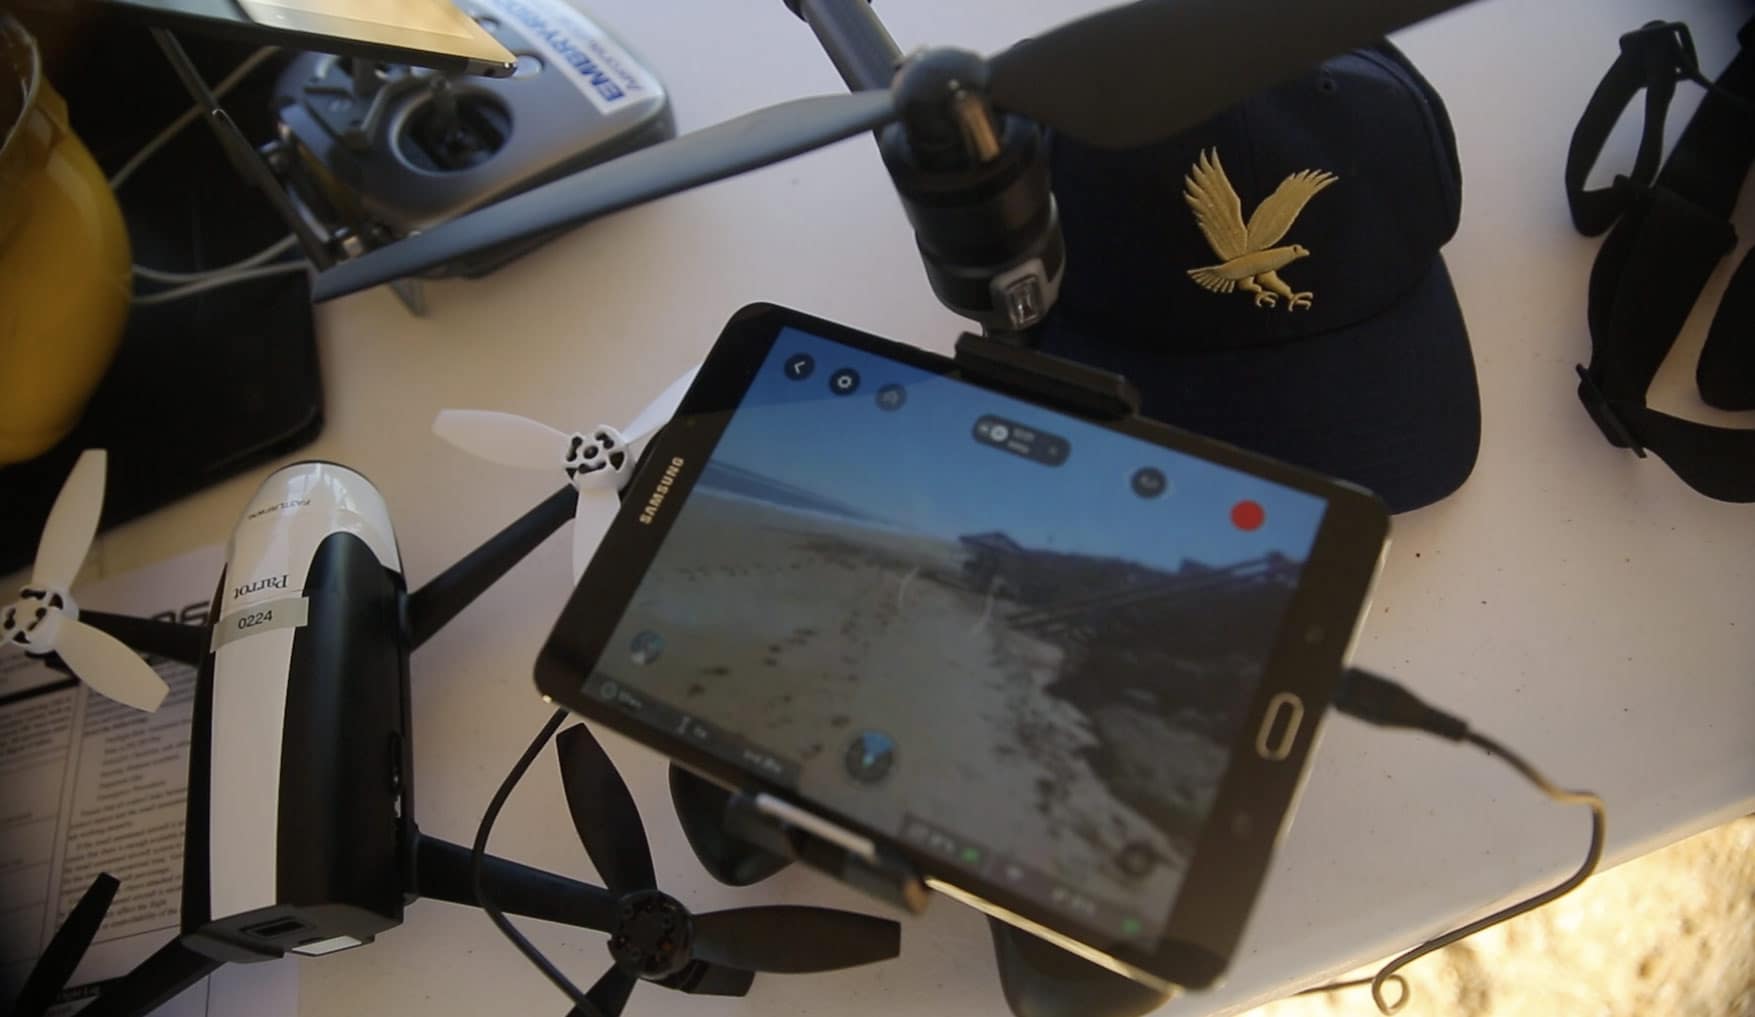 a drone, iPad and Embry-Riddle branded hat